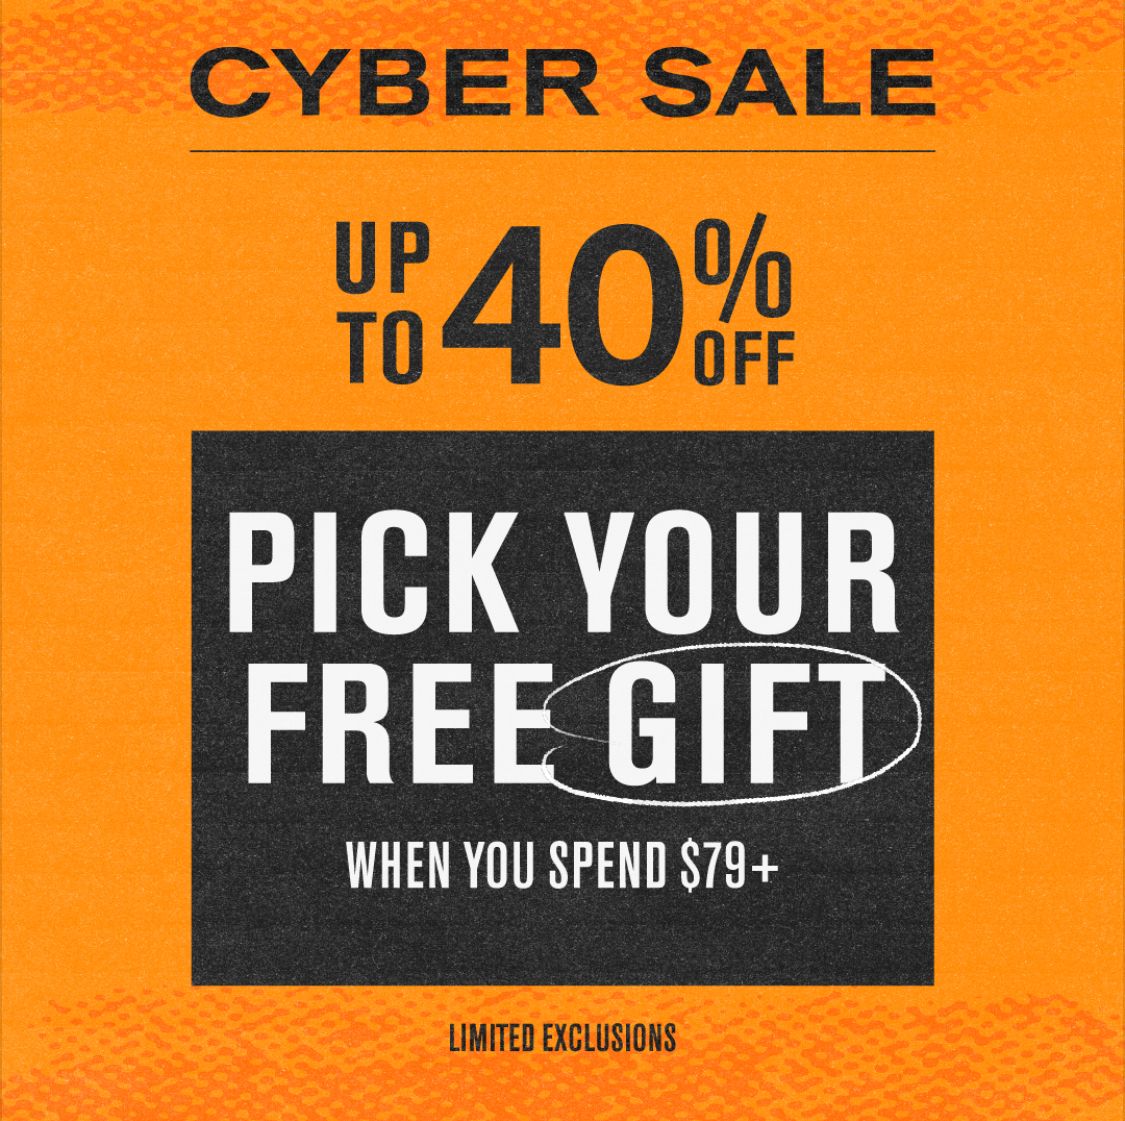 Cyber Weekend is here! Get up to 40% off plus gift with purchase when you spend $79+. Limited exclusions apply. stance.com